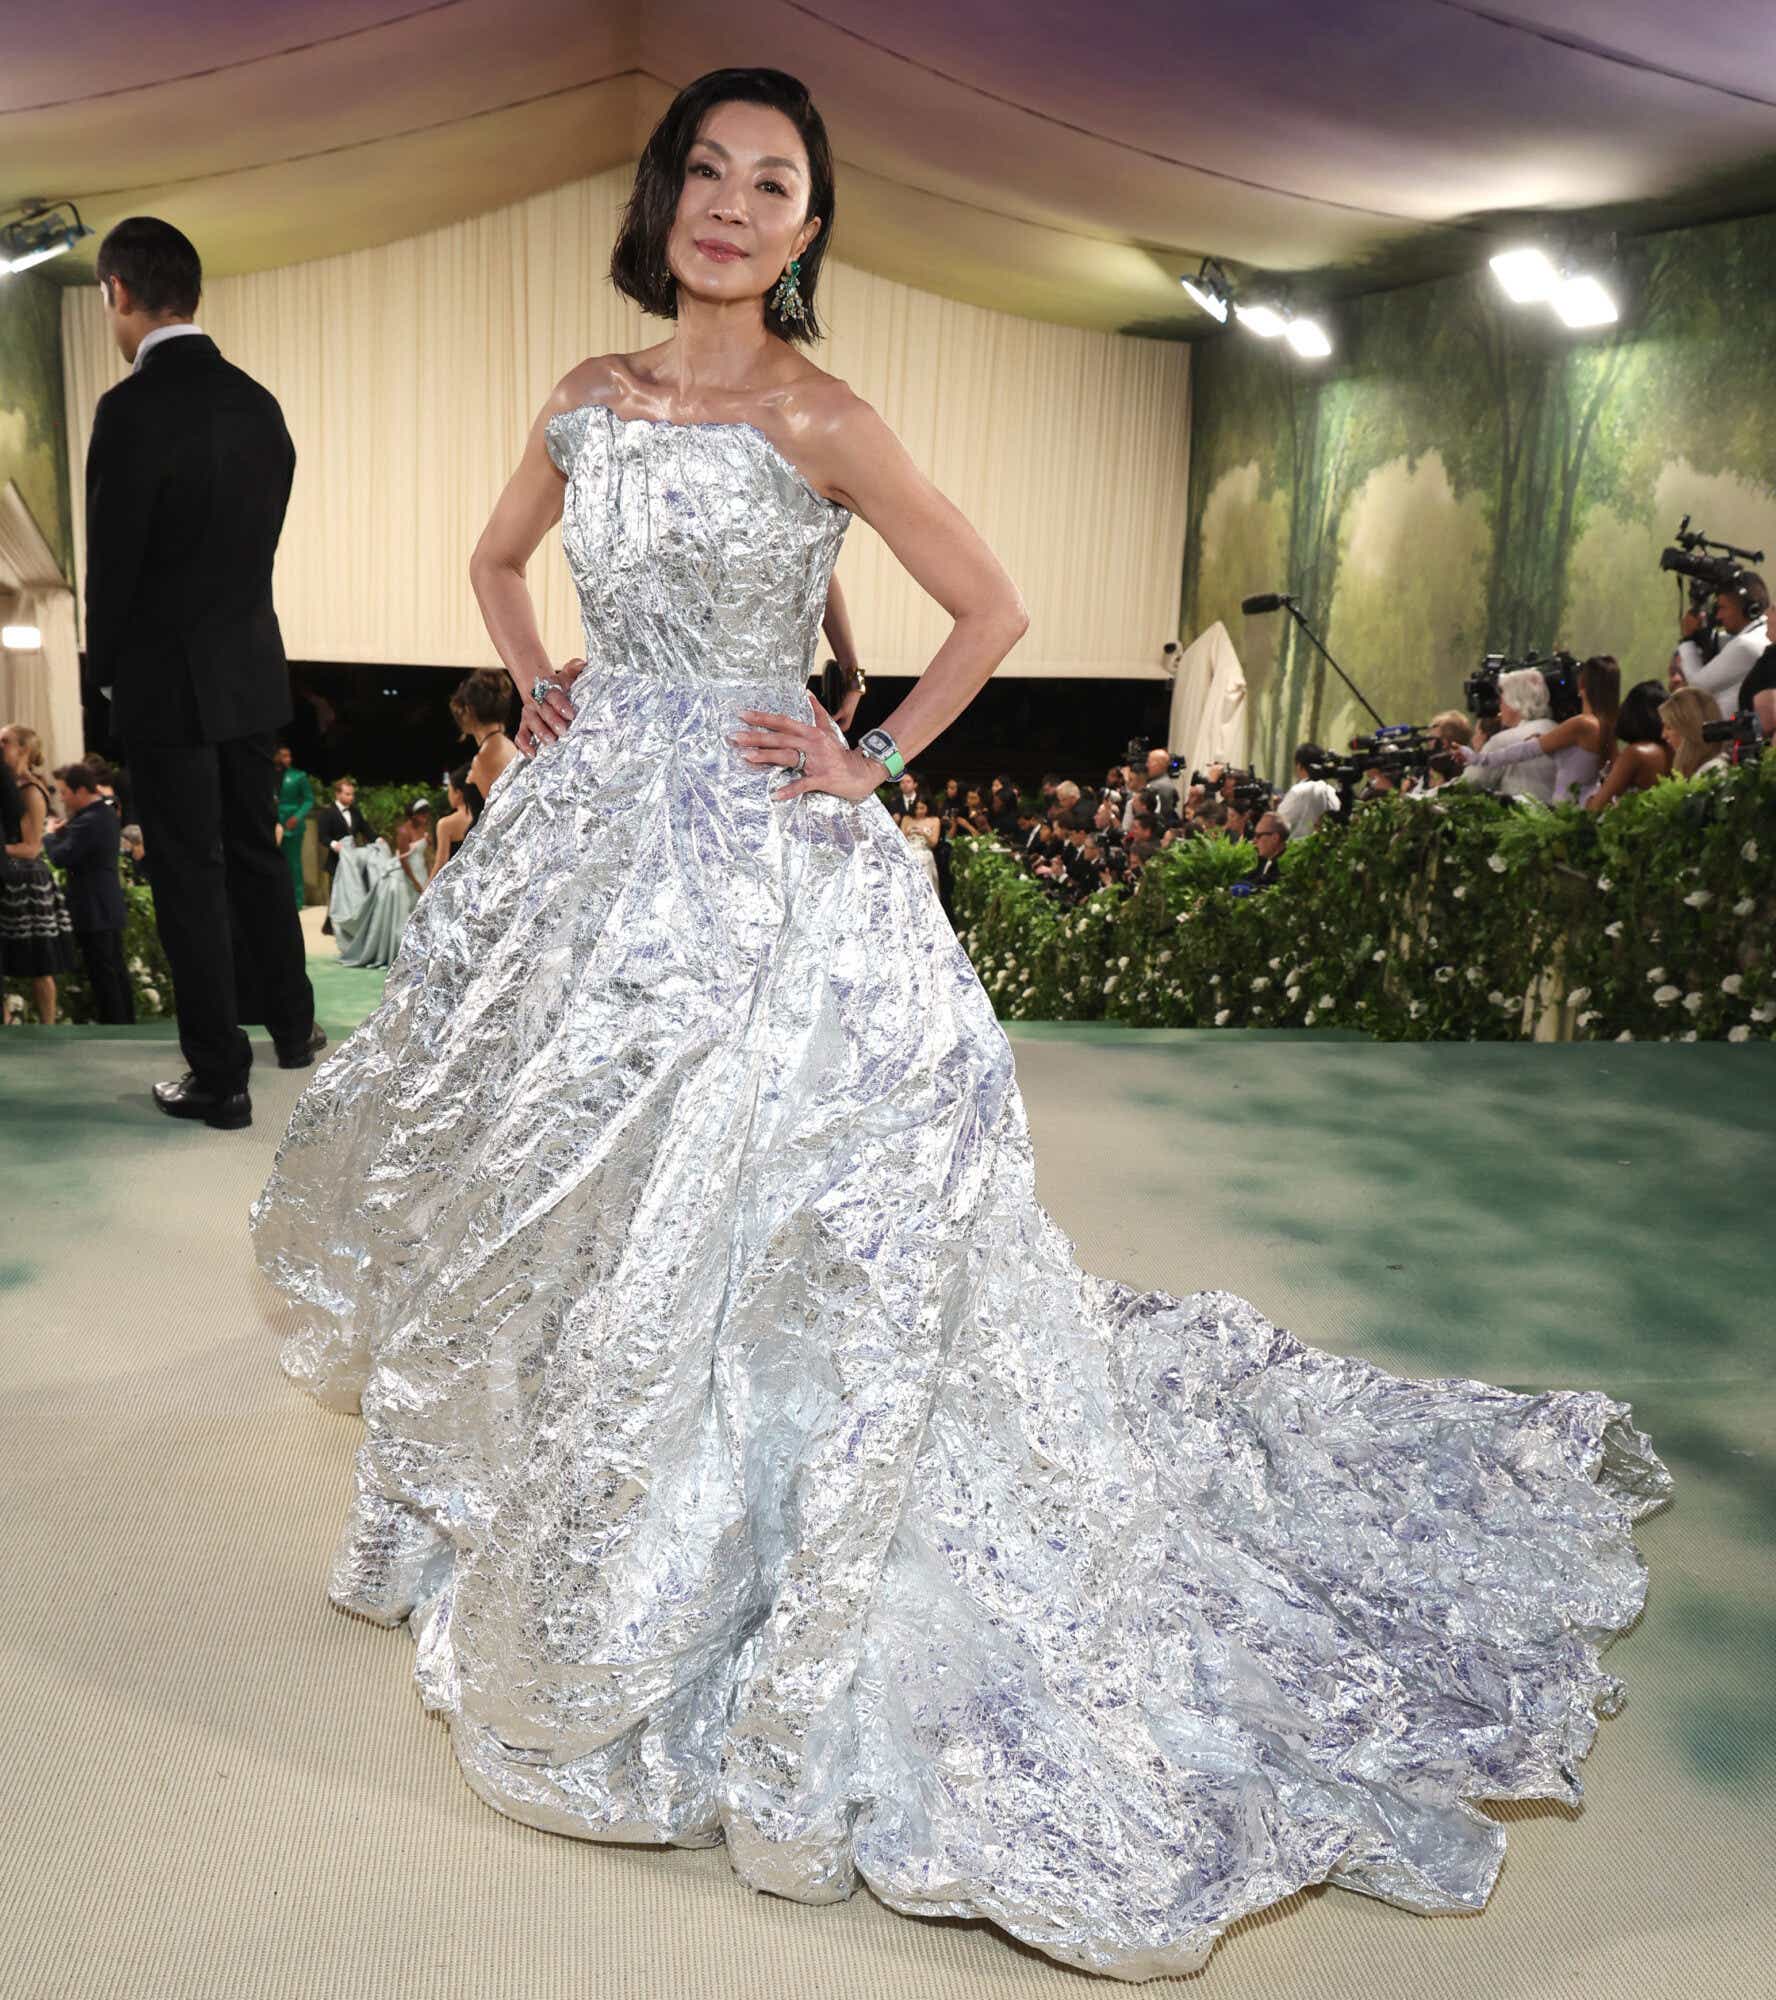 Michelle Yeoh wears a strapless silver ball gown with the texture of scrunched tinfoil